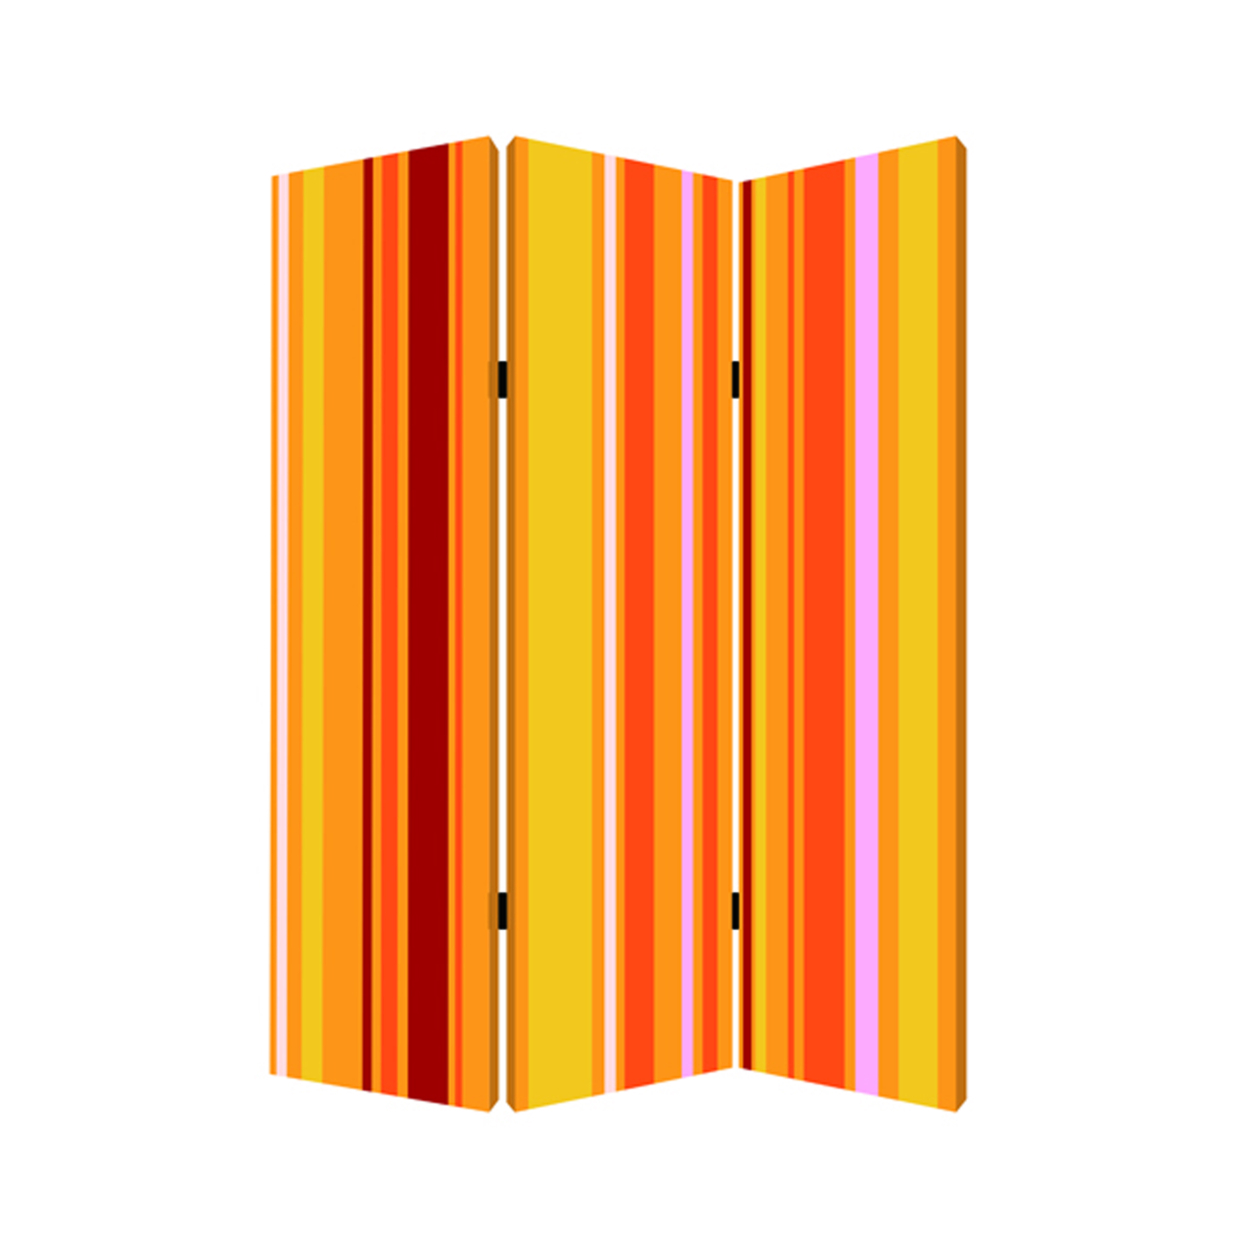 3 Panel Canvas Screen With Bright Stripe Print, Yellow And Red- Saltoro Sherpi